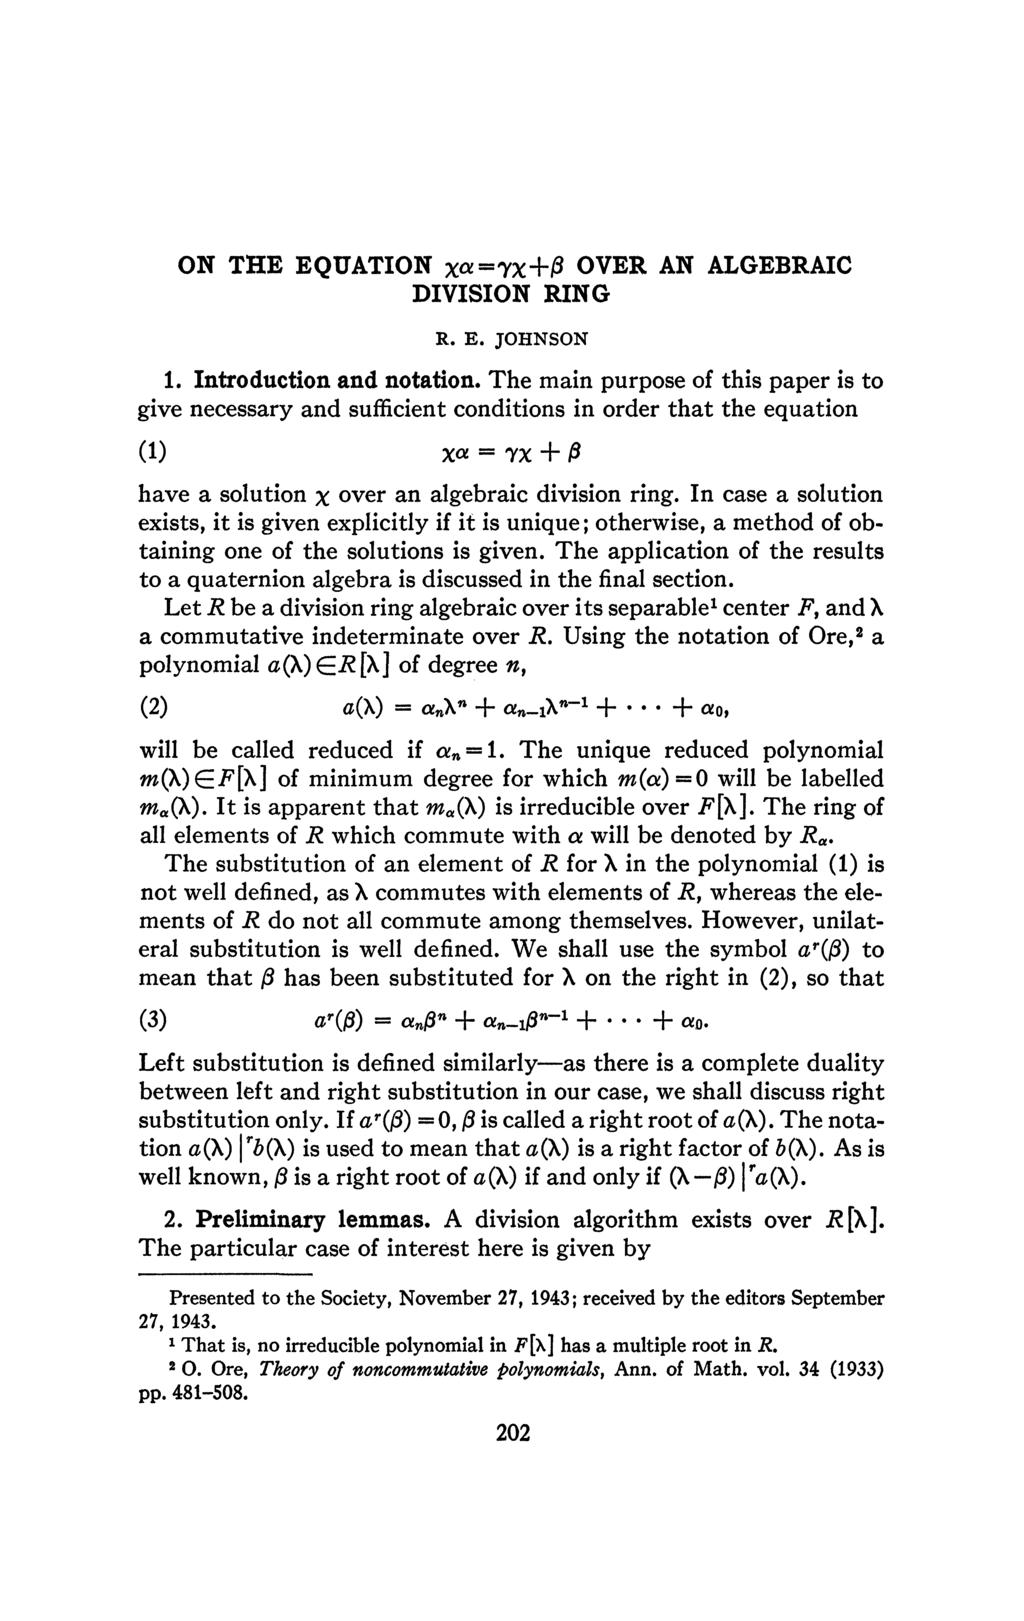 ON THE EQUATION Xa=7X+/3 OVER AN ALGEBRAIC DIVISION RING R. E. JOHNSON 1. Introduction and notation.